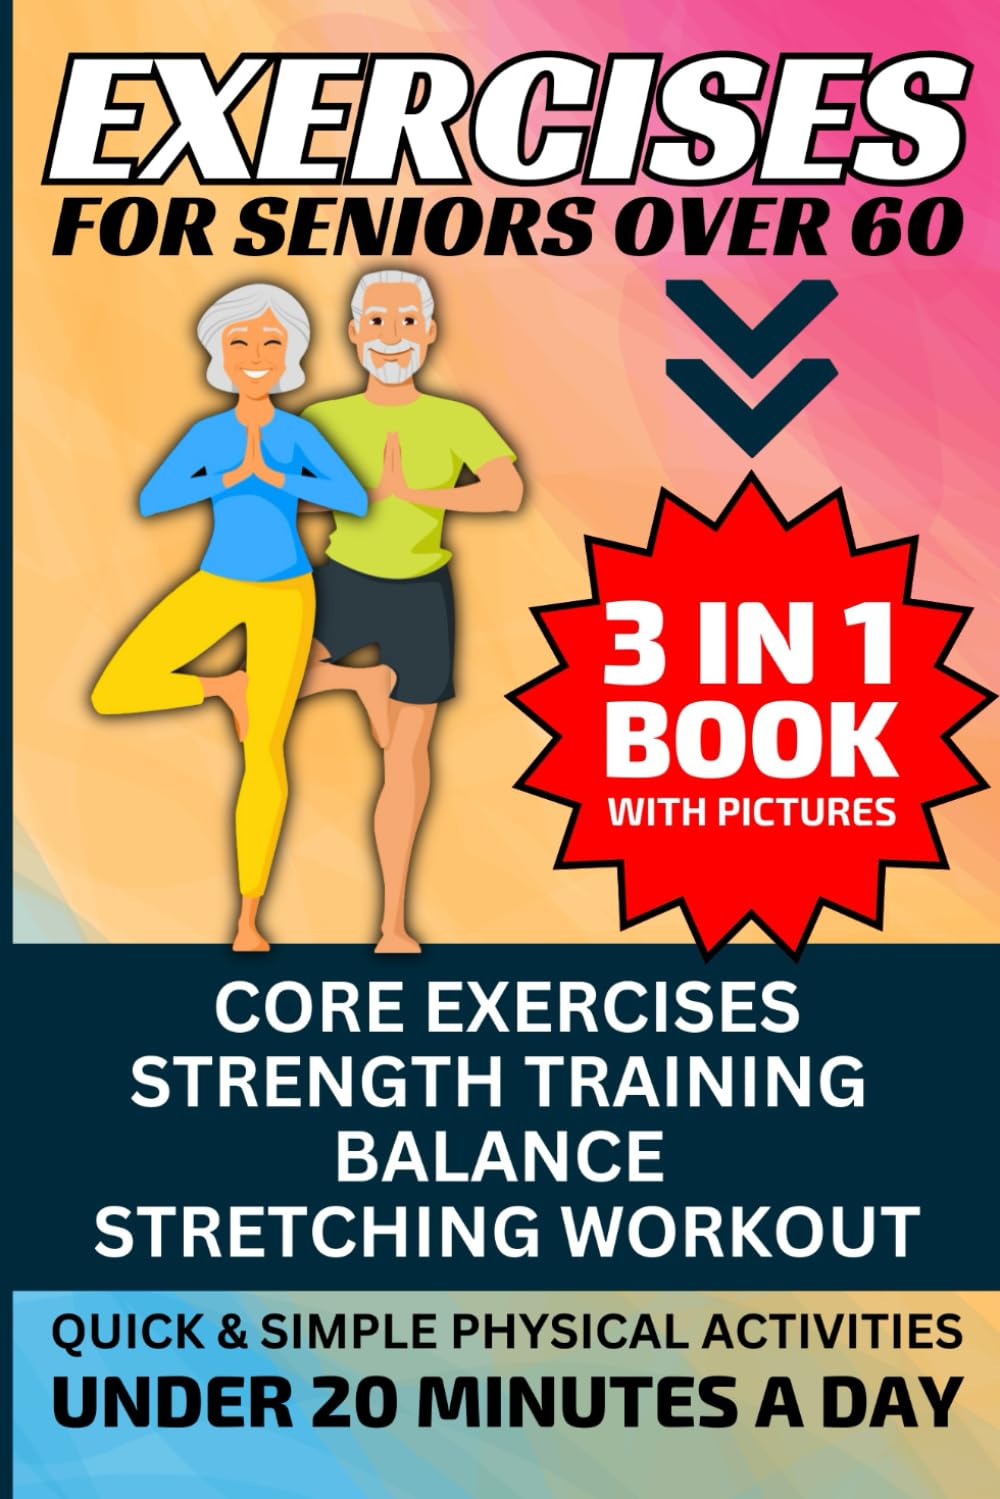 Exercises for Seniors Over 60: 3 in 1 Book With Pictures- Core Exercises, Strength Training, Balance & Stretching Workout, Quick & Simple Physical Activities Under 20 Minutes A Day